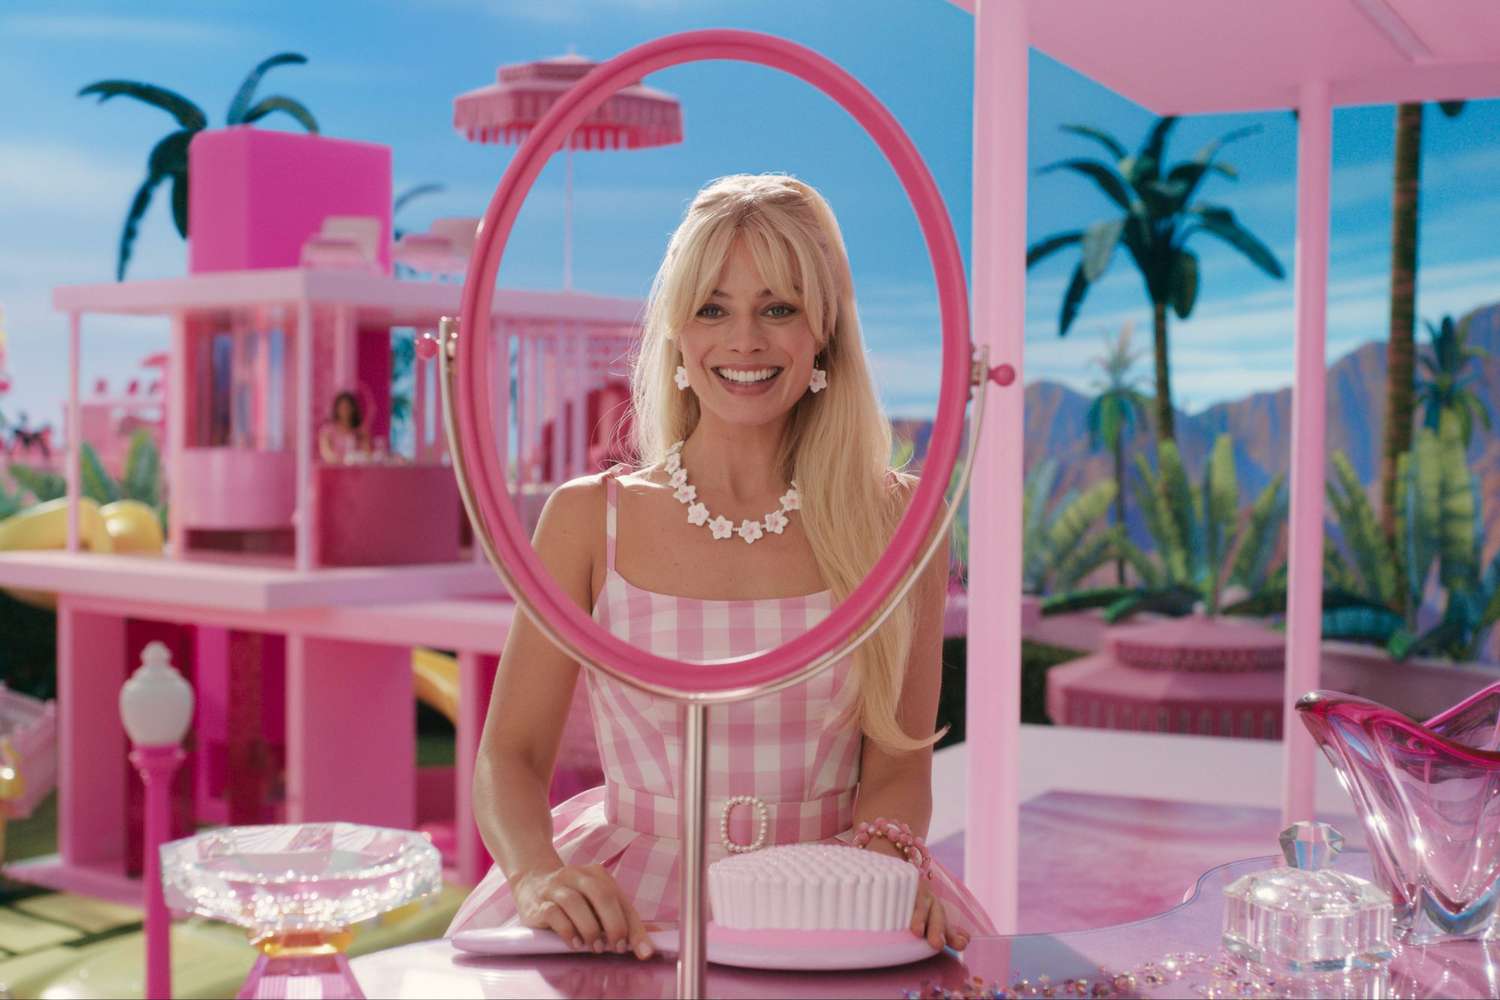 Margot Robbie, who plays Barbie, sit down in front of vanity and smiles. 